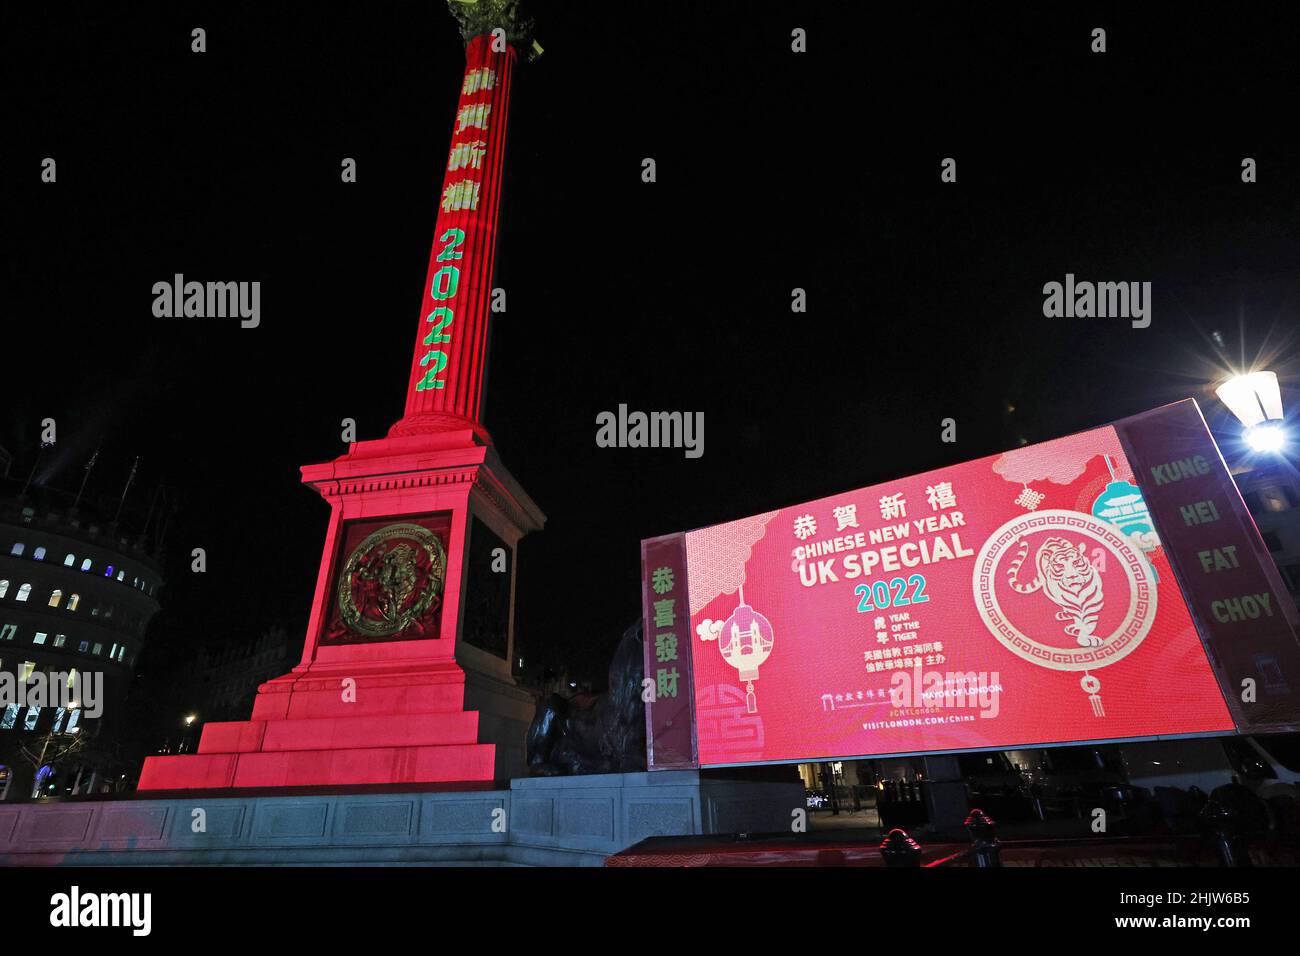 London, UK. 31st Jan, 2022. Photo taken on Jan. 31, 2022 shows the Nelson's Column and a screen nearby illuminated in red to celebrate the Chinese Lunar New Year at Trafalgar Square in London, Britain. Credit: Li Ying/Xinhua/Alamy Live News Stock Photo